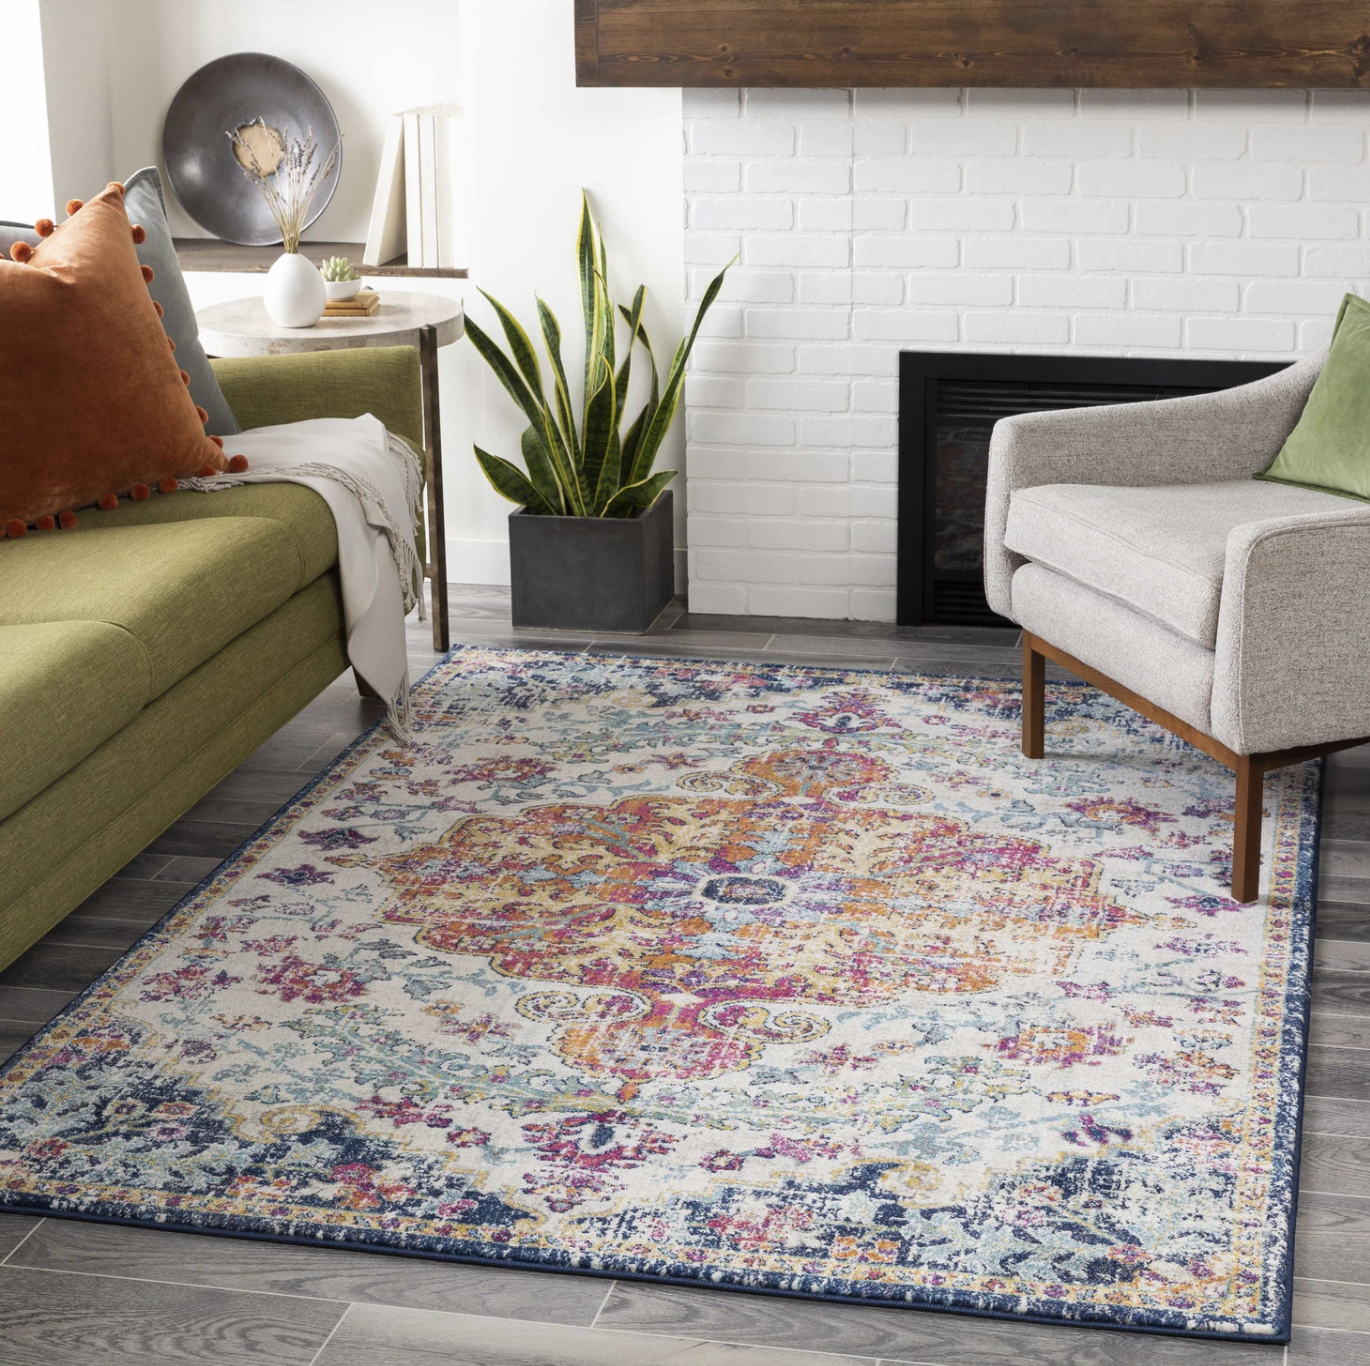 The rug is shown in a living room